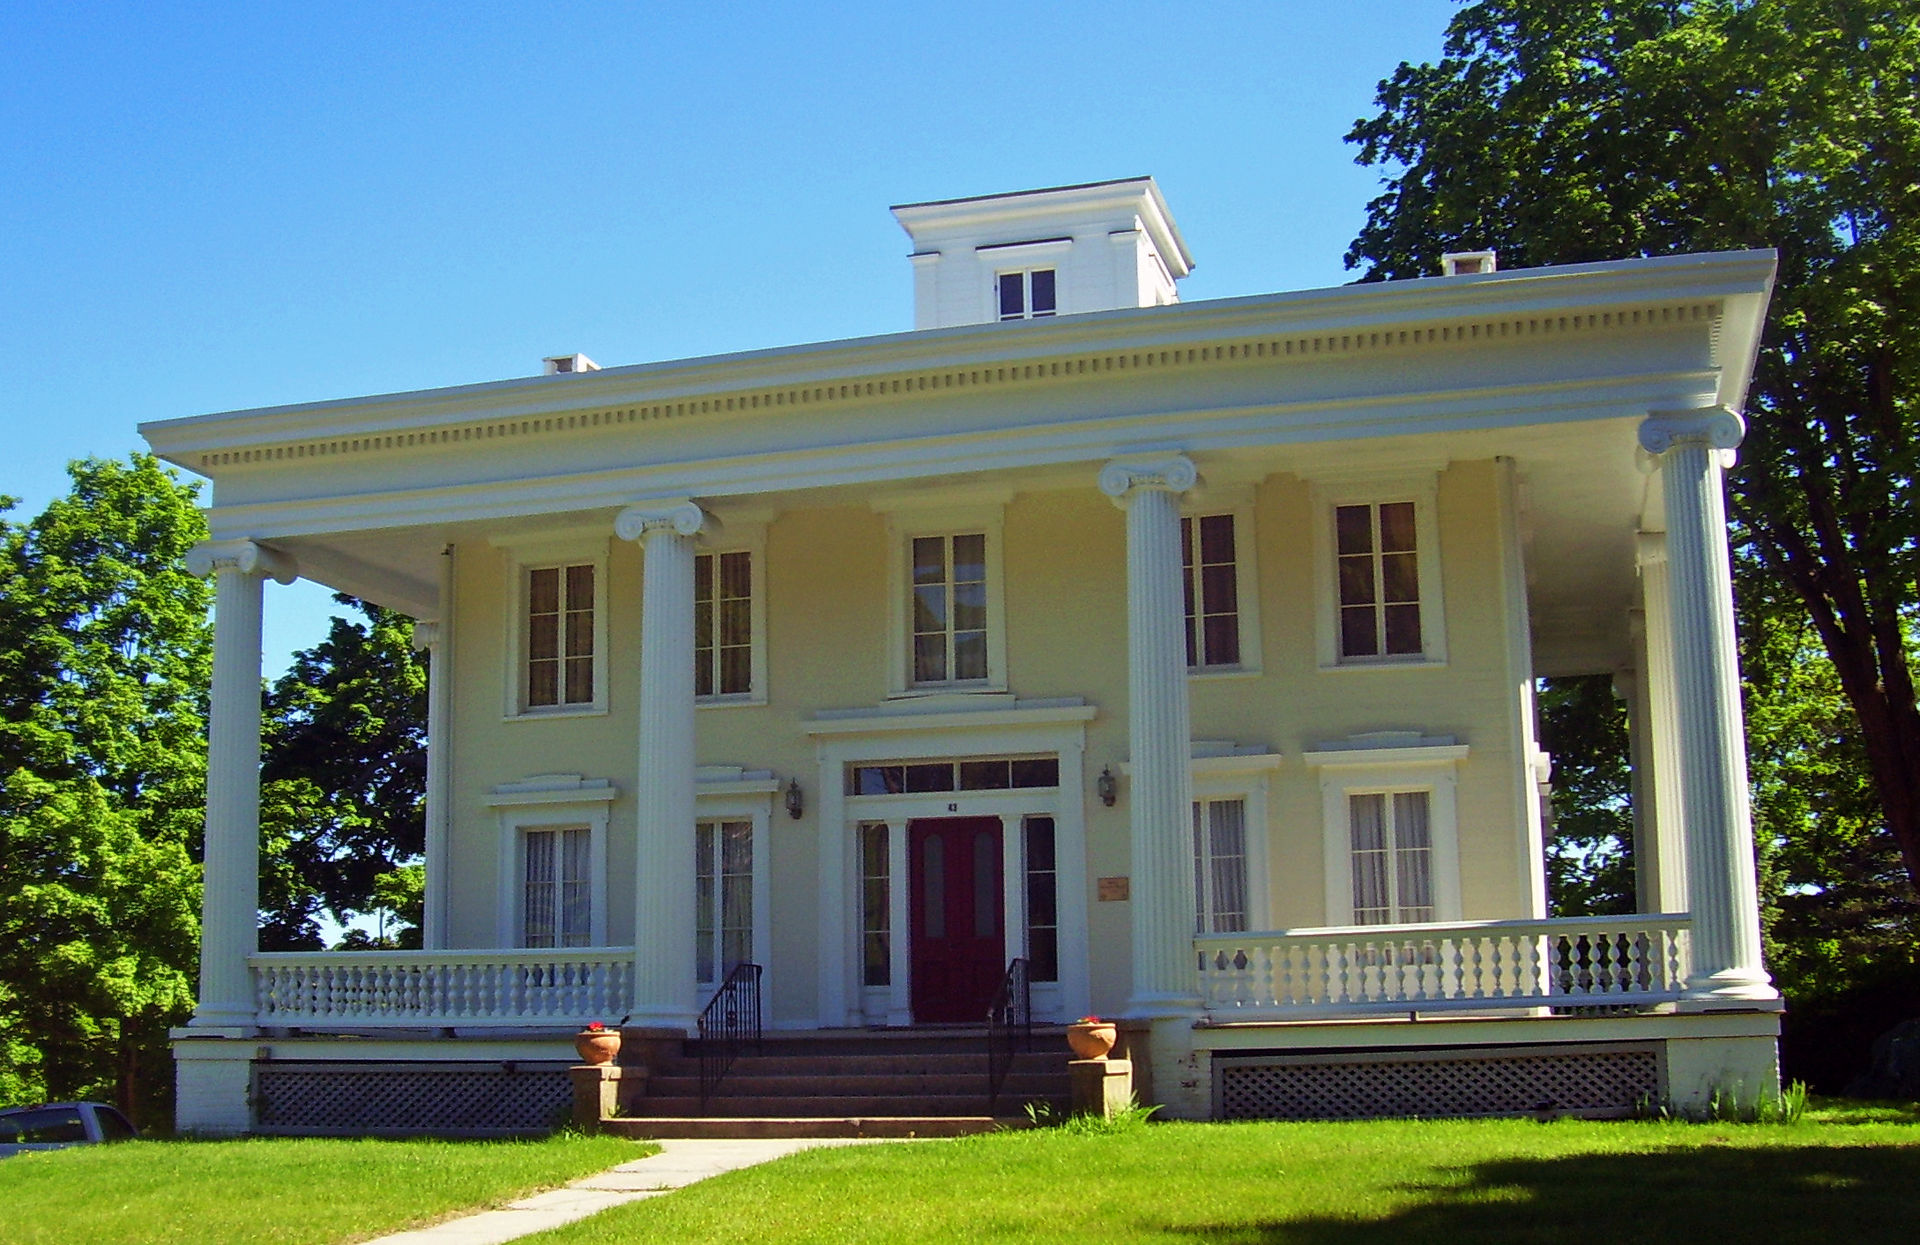 The Walter Brewster House